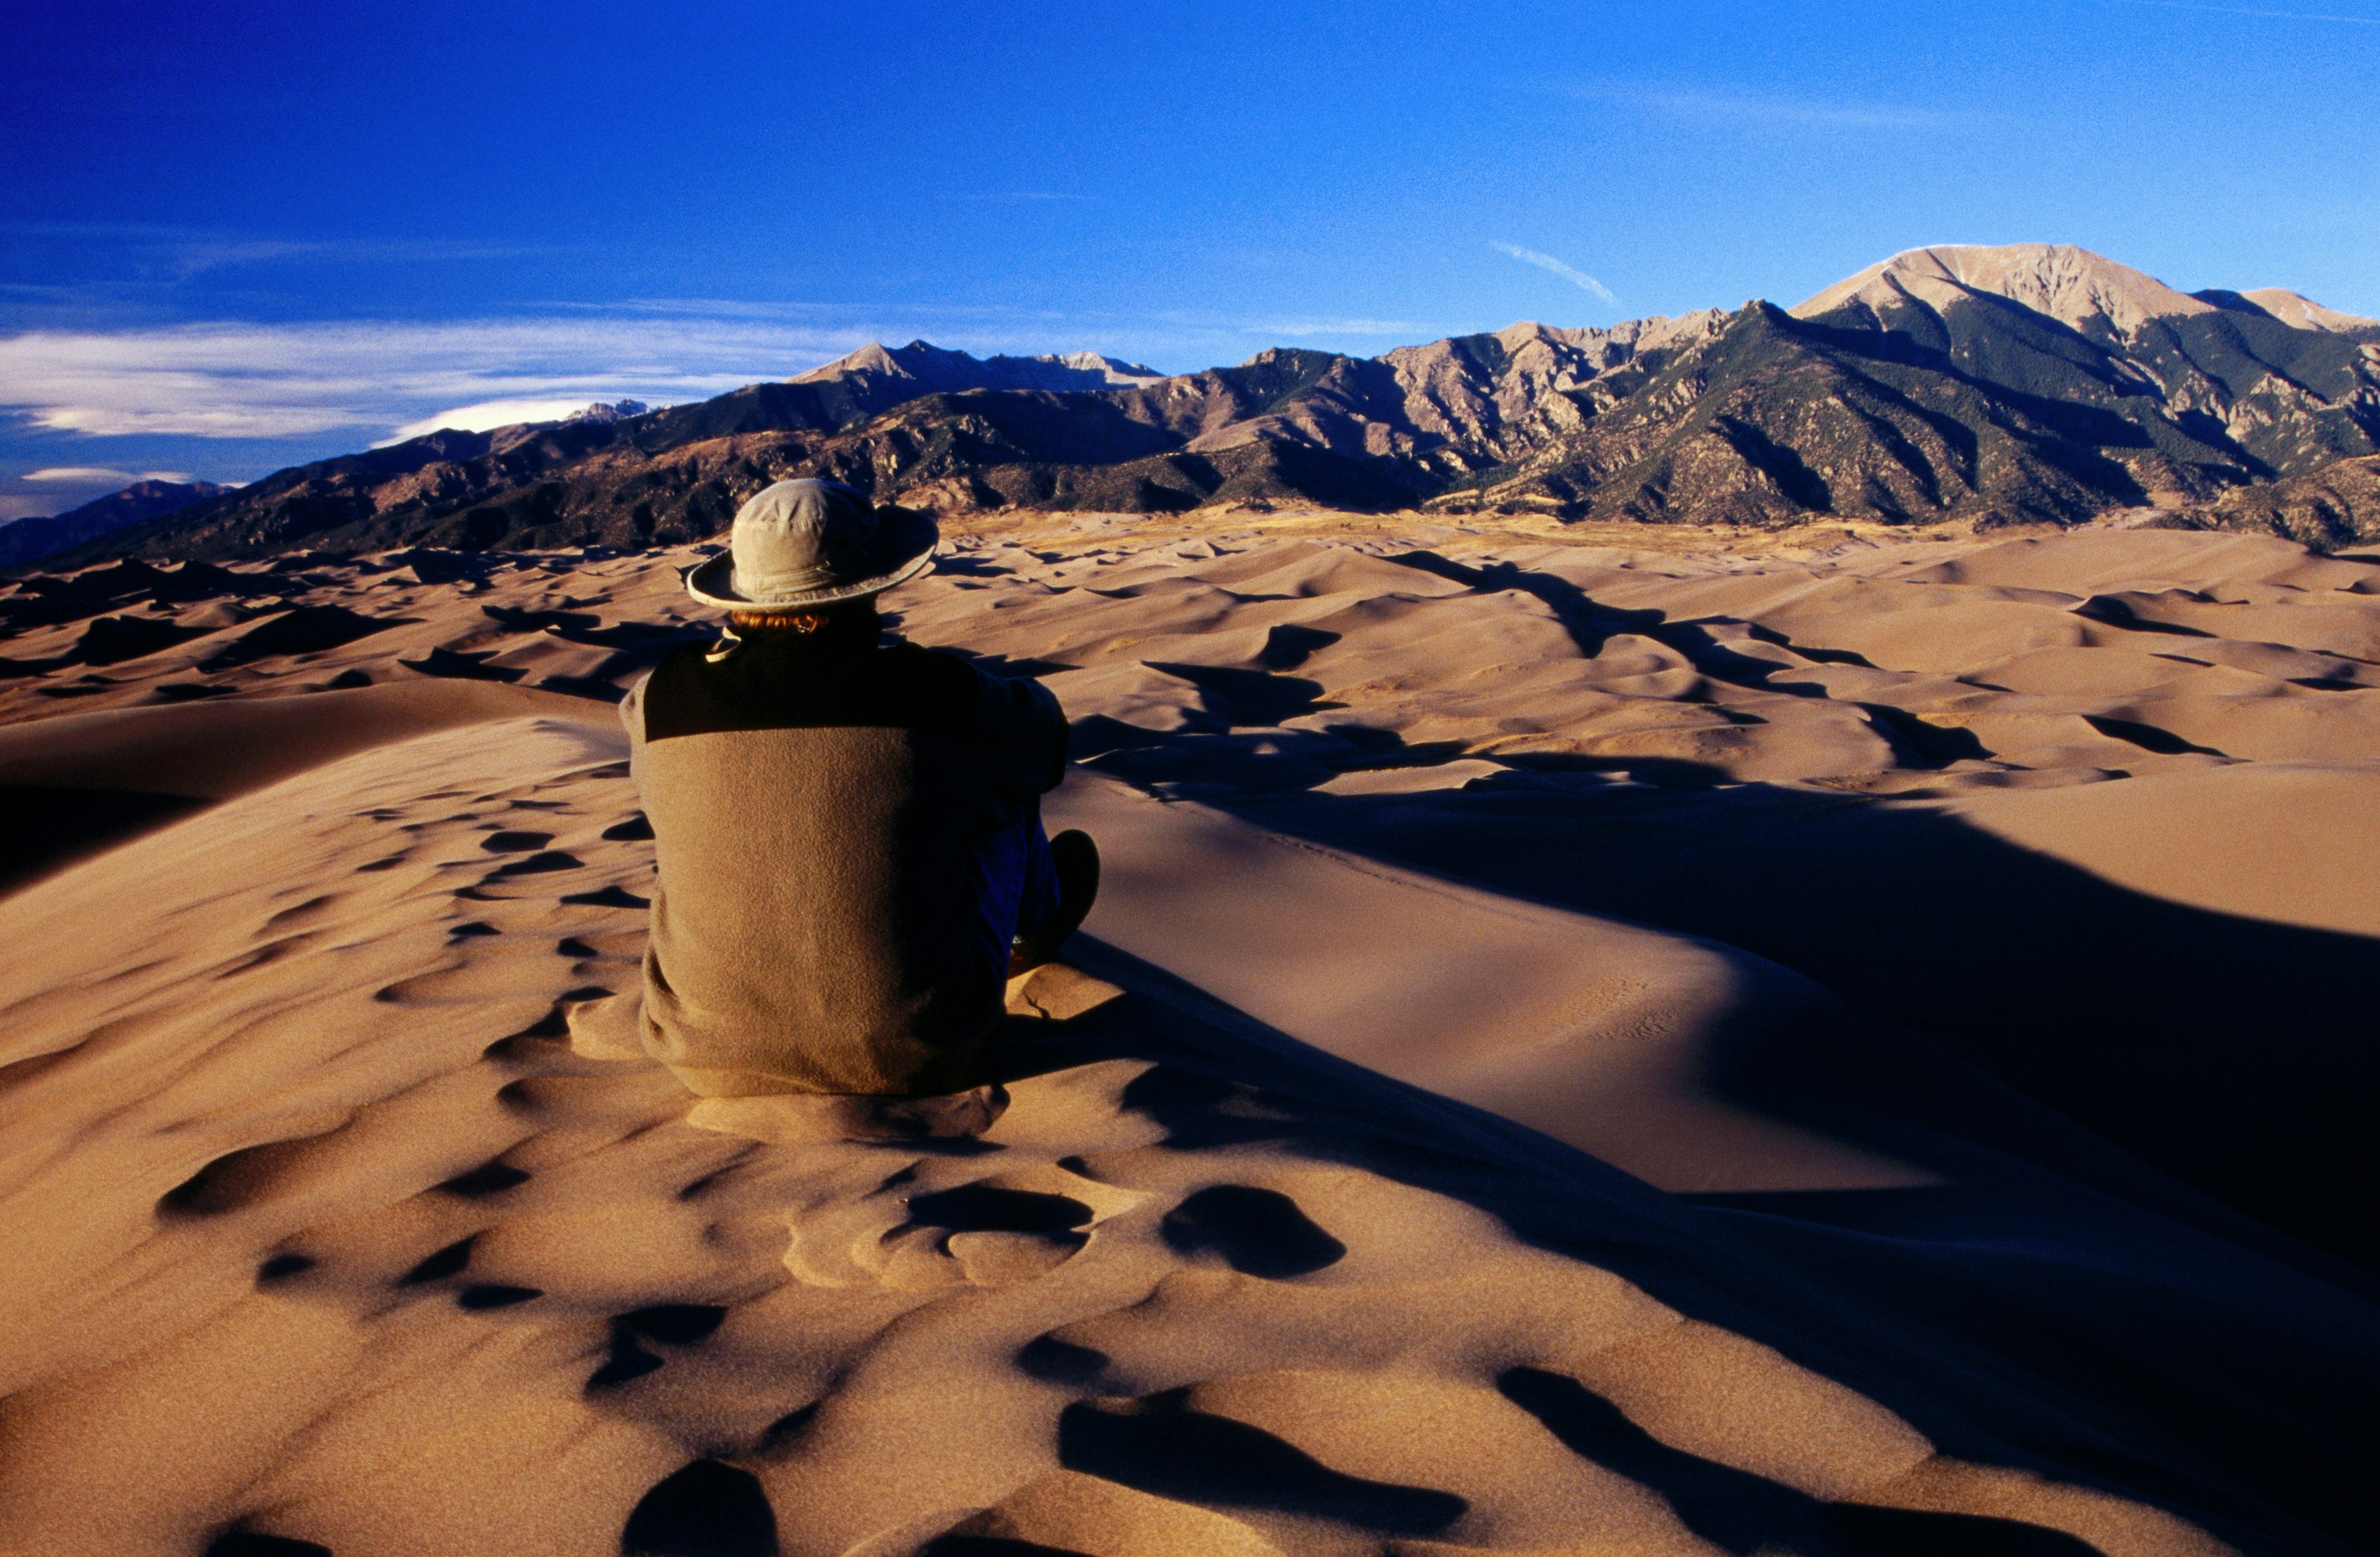 A man in a beige fleece jacket and a twill bucket hat sits with his back to the camera, blending into the sand dune on which he is perched, staring at the vast Sangre de Cristo Mountains in the distance.